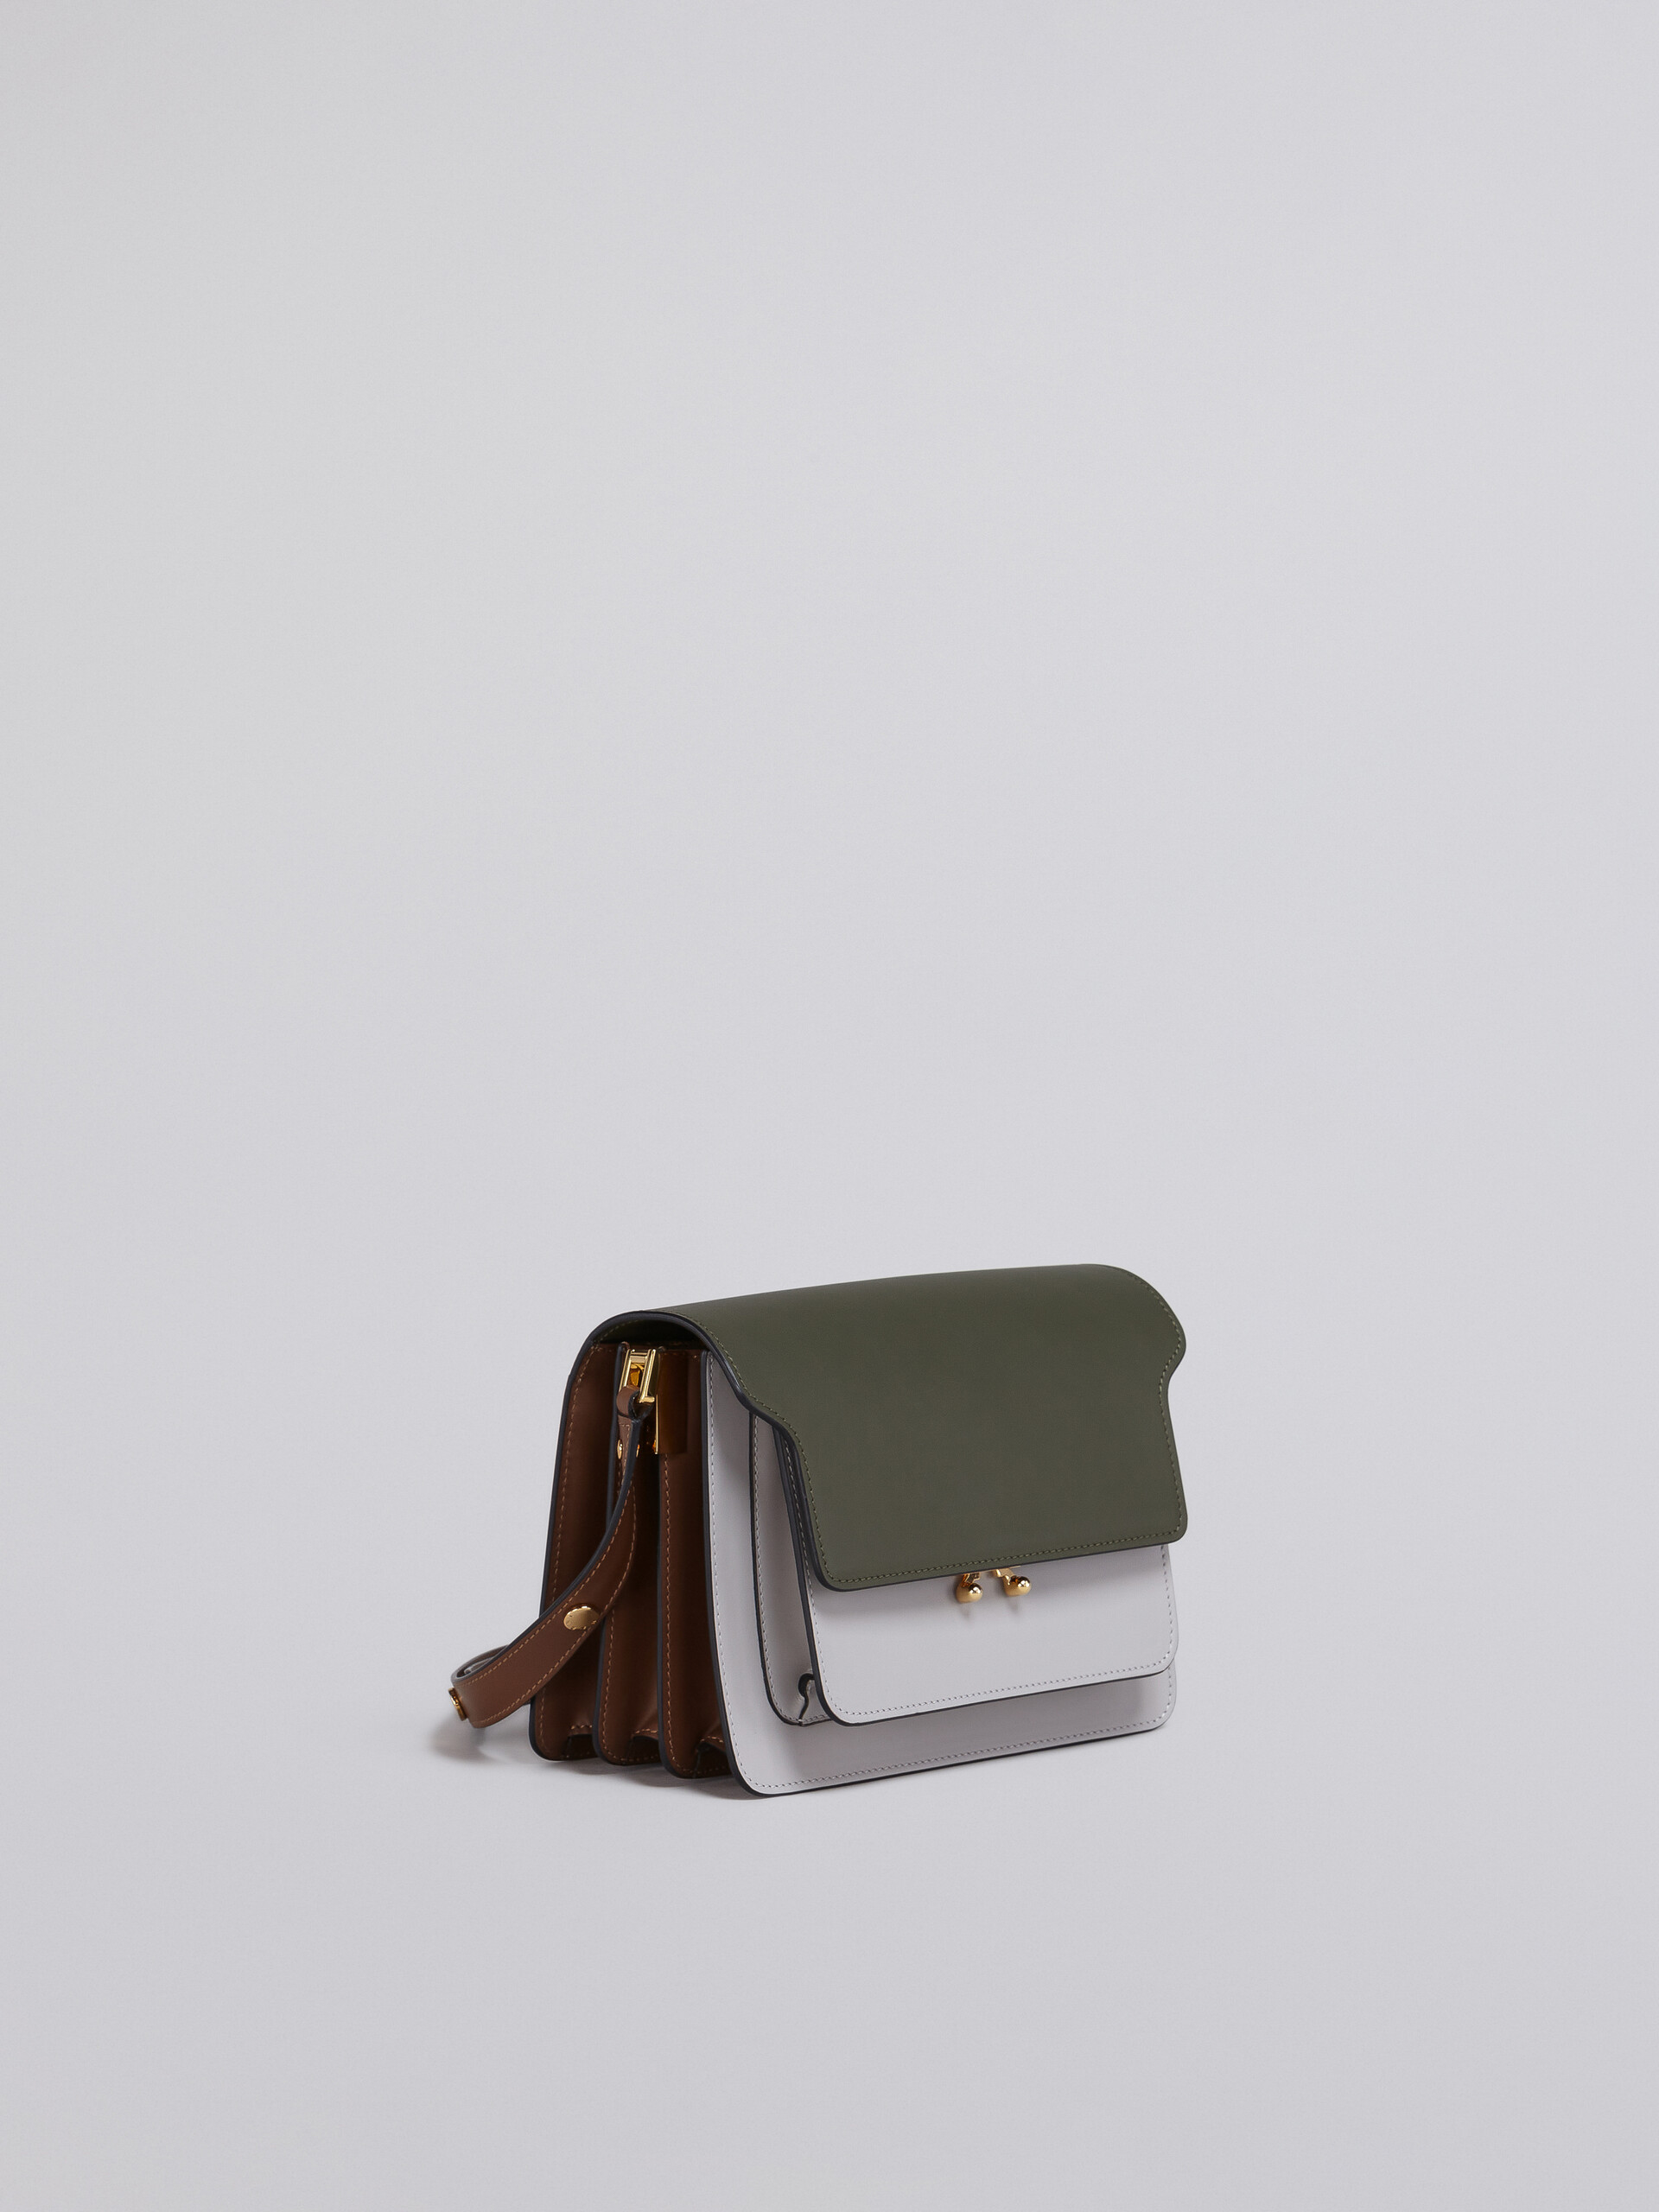 TRUNK medium bag in green grey and brown leather - Shoulder Bags - Image 5